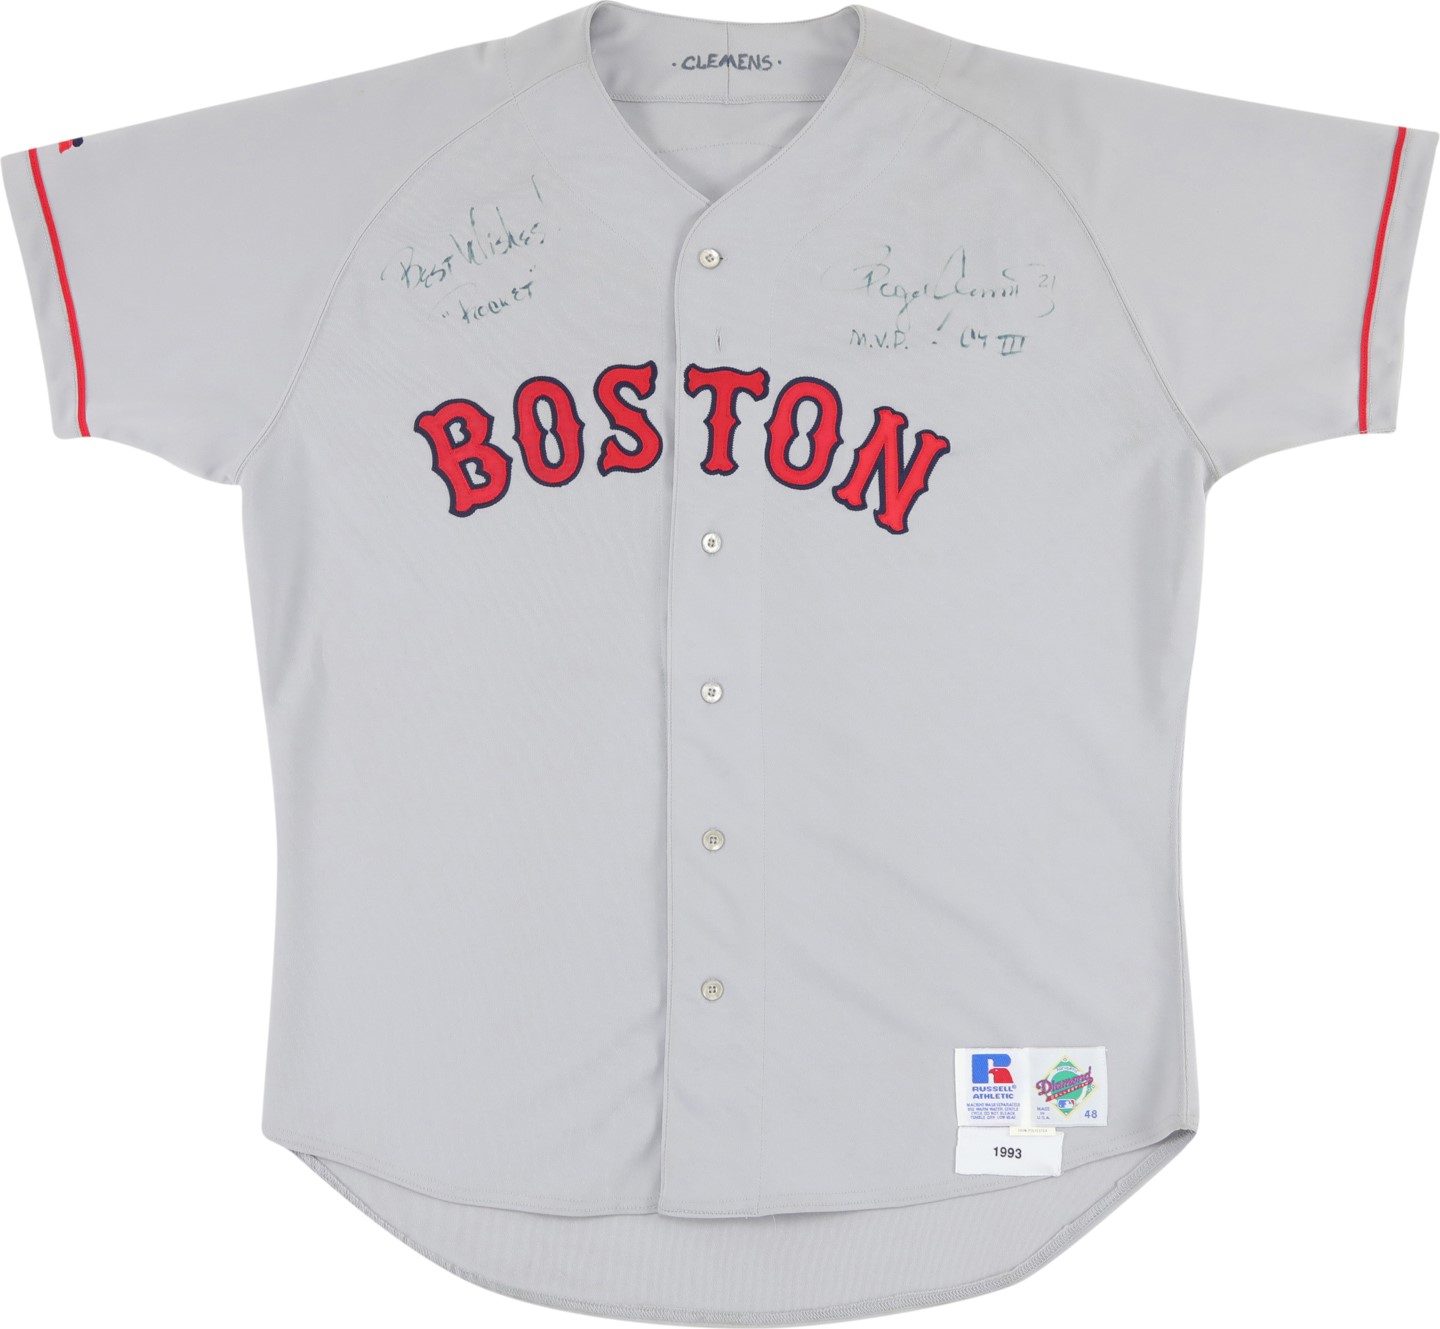 Baseball Equipment - 1993 Roger Clemens Boston Red Sox Signed Game Worn Jersey